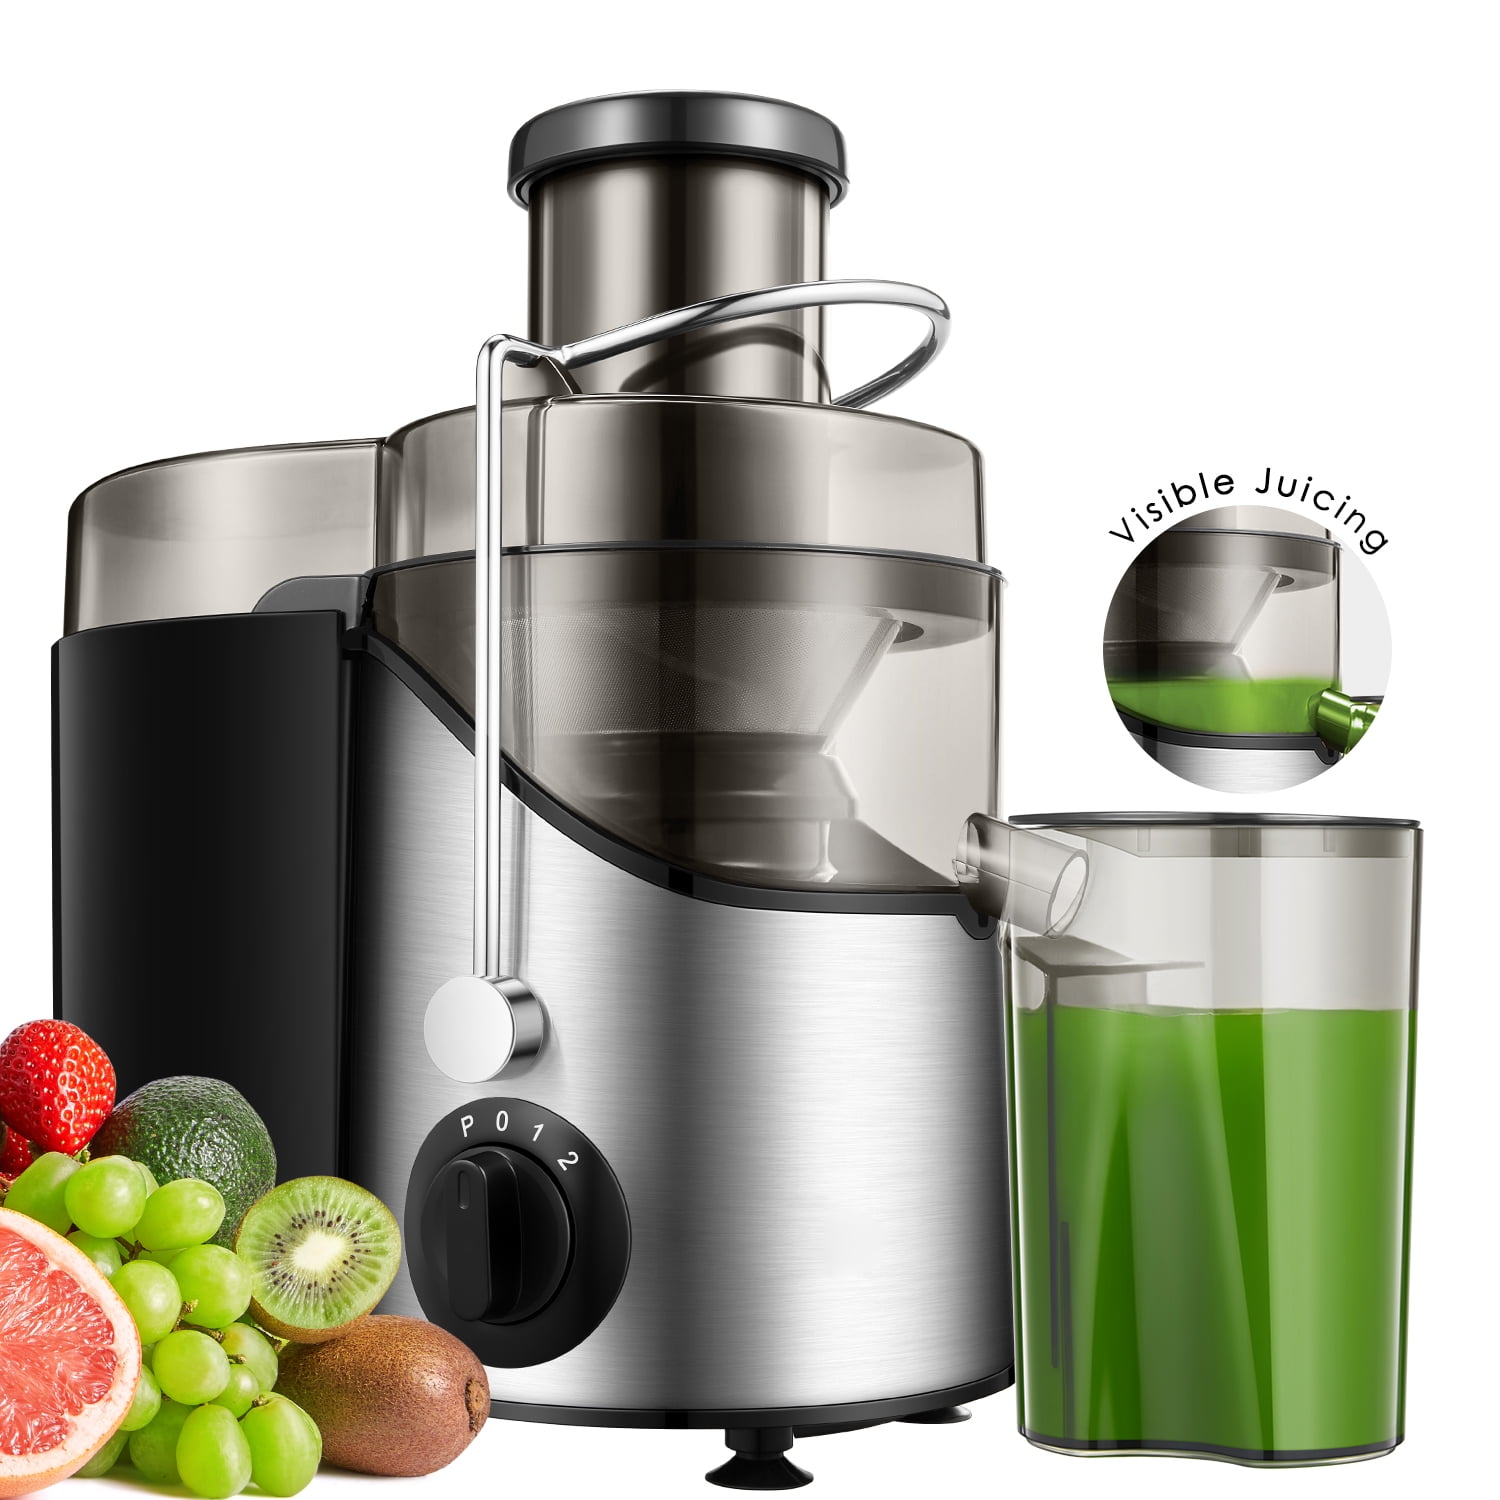 VAVSEA Juicer Machine 600W, Juice Extractor, Anti-Drip Press Centrifugal  Juicer with Big Mouth 3 Feed Chute for Whole Fruit Vegetable, BPA-Free,  Easy